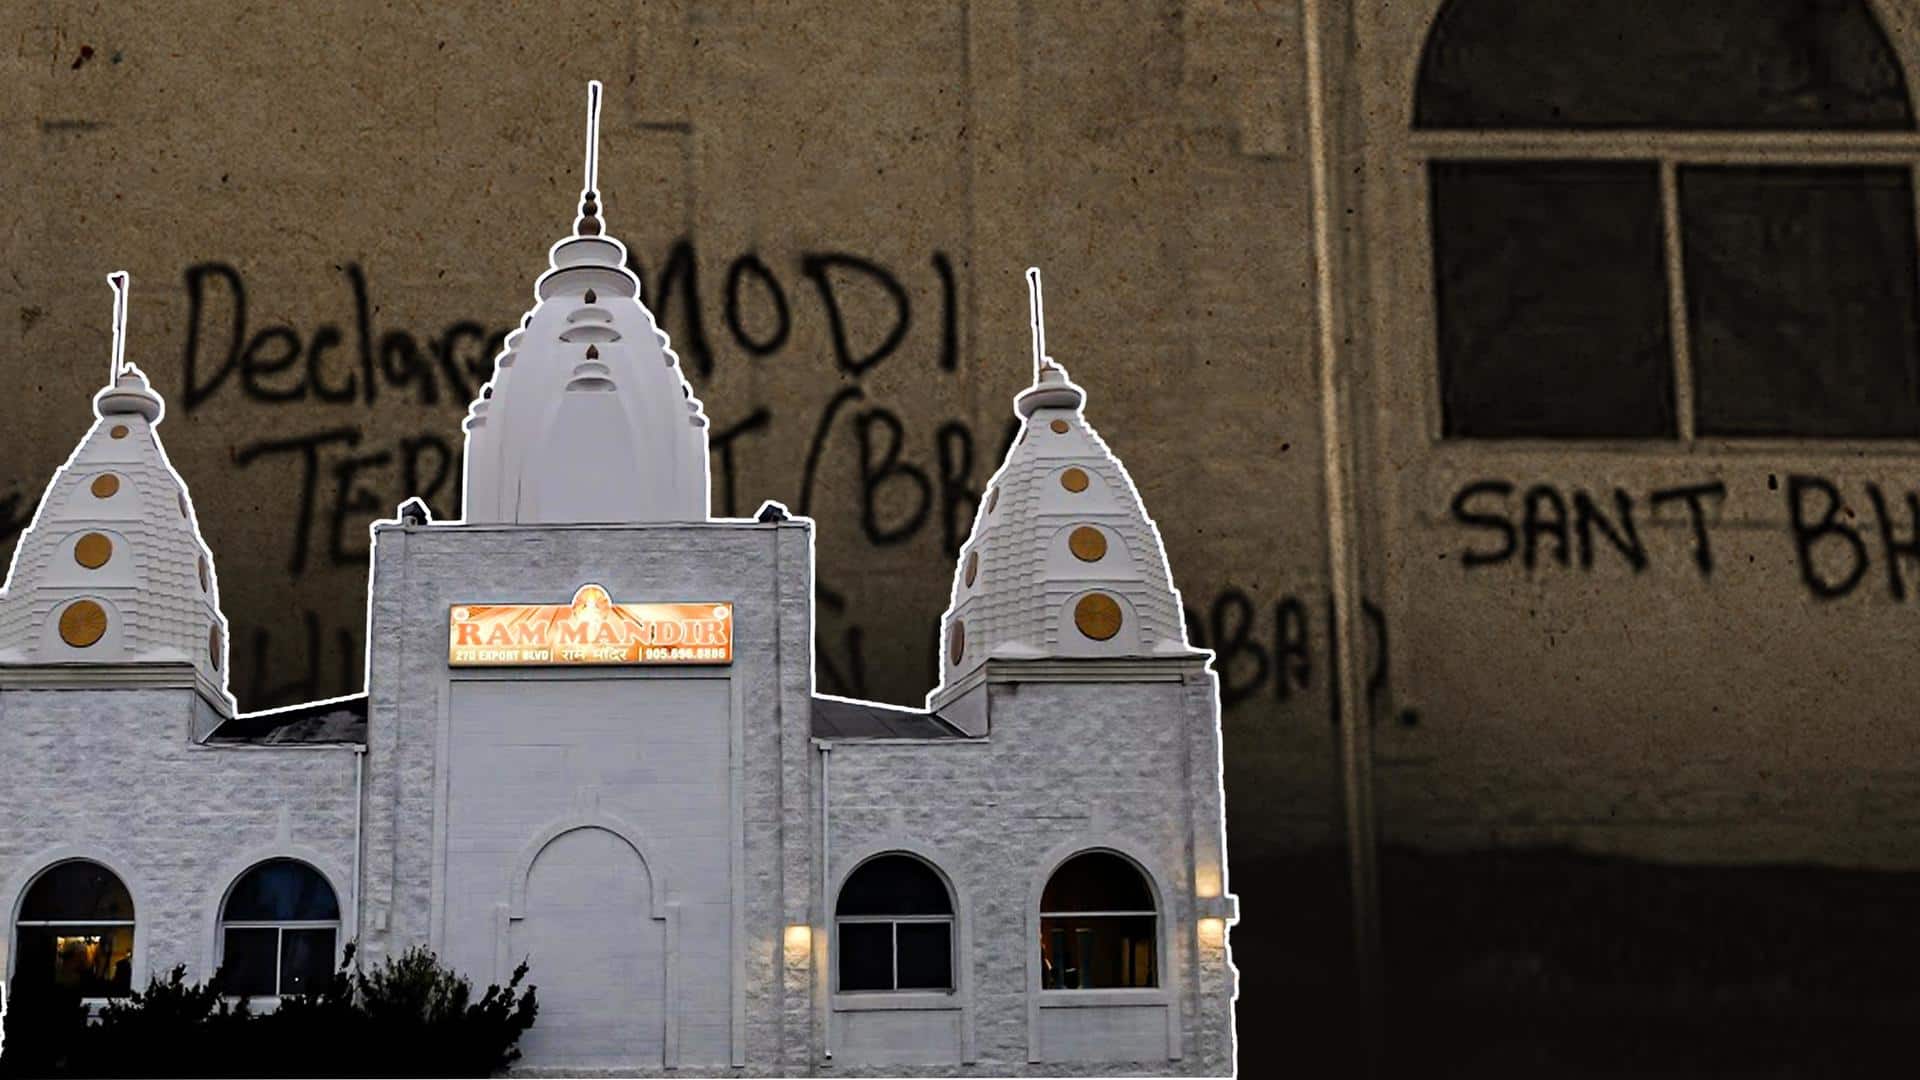 Canada: Ram temple defaced with anti-India graffiti, India demands action